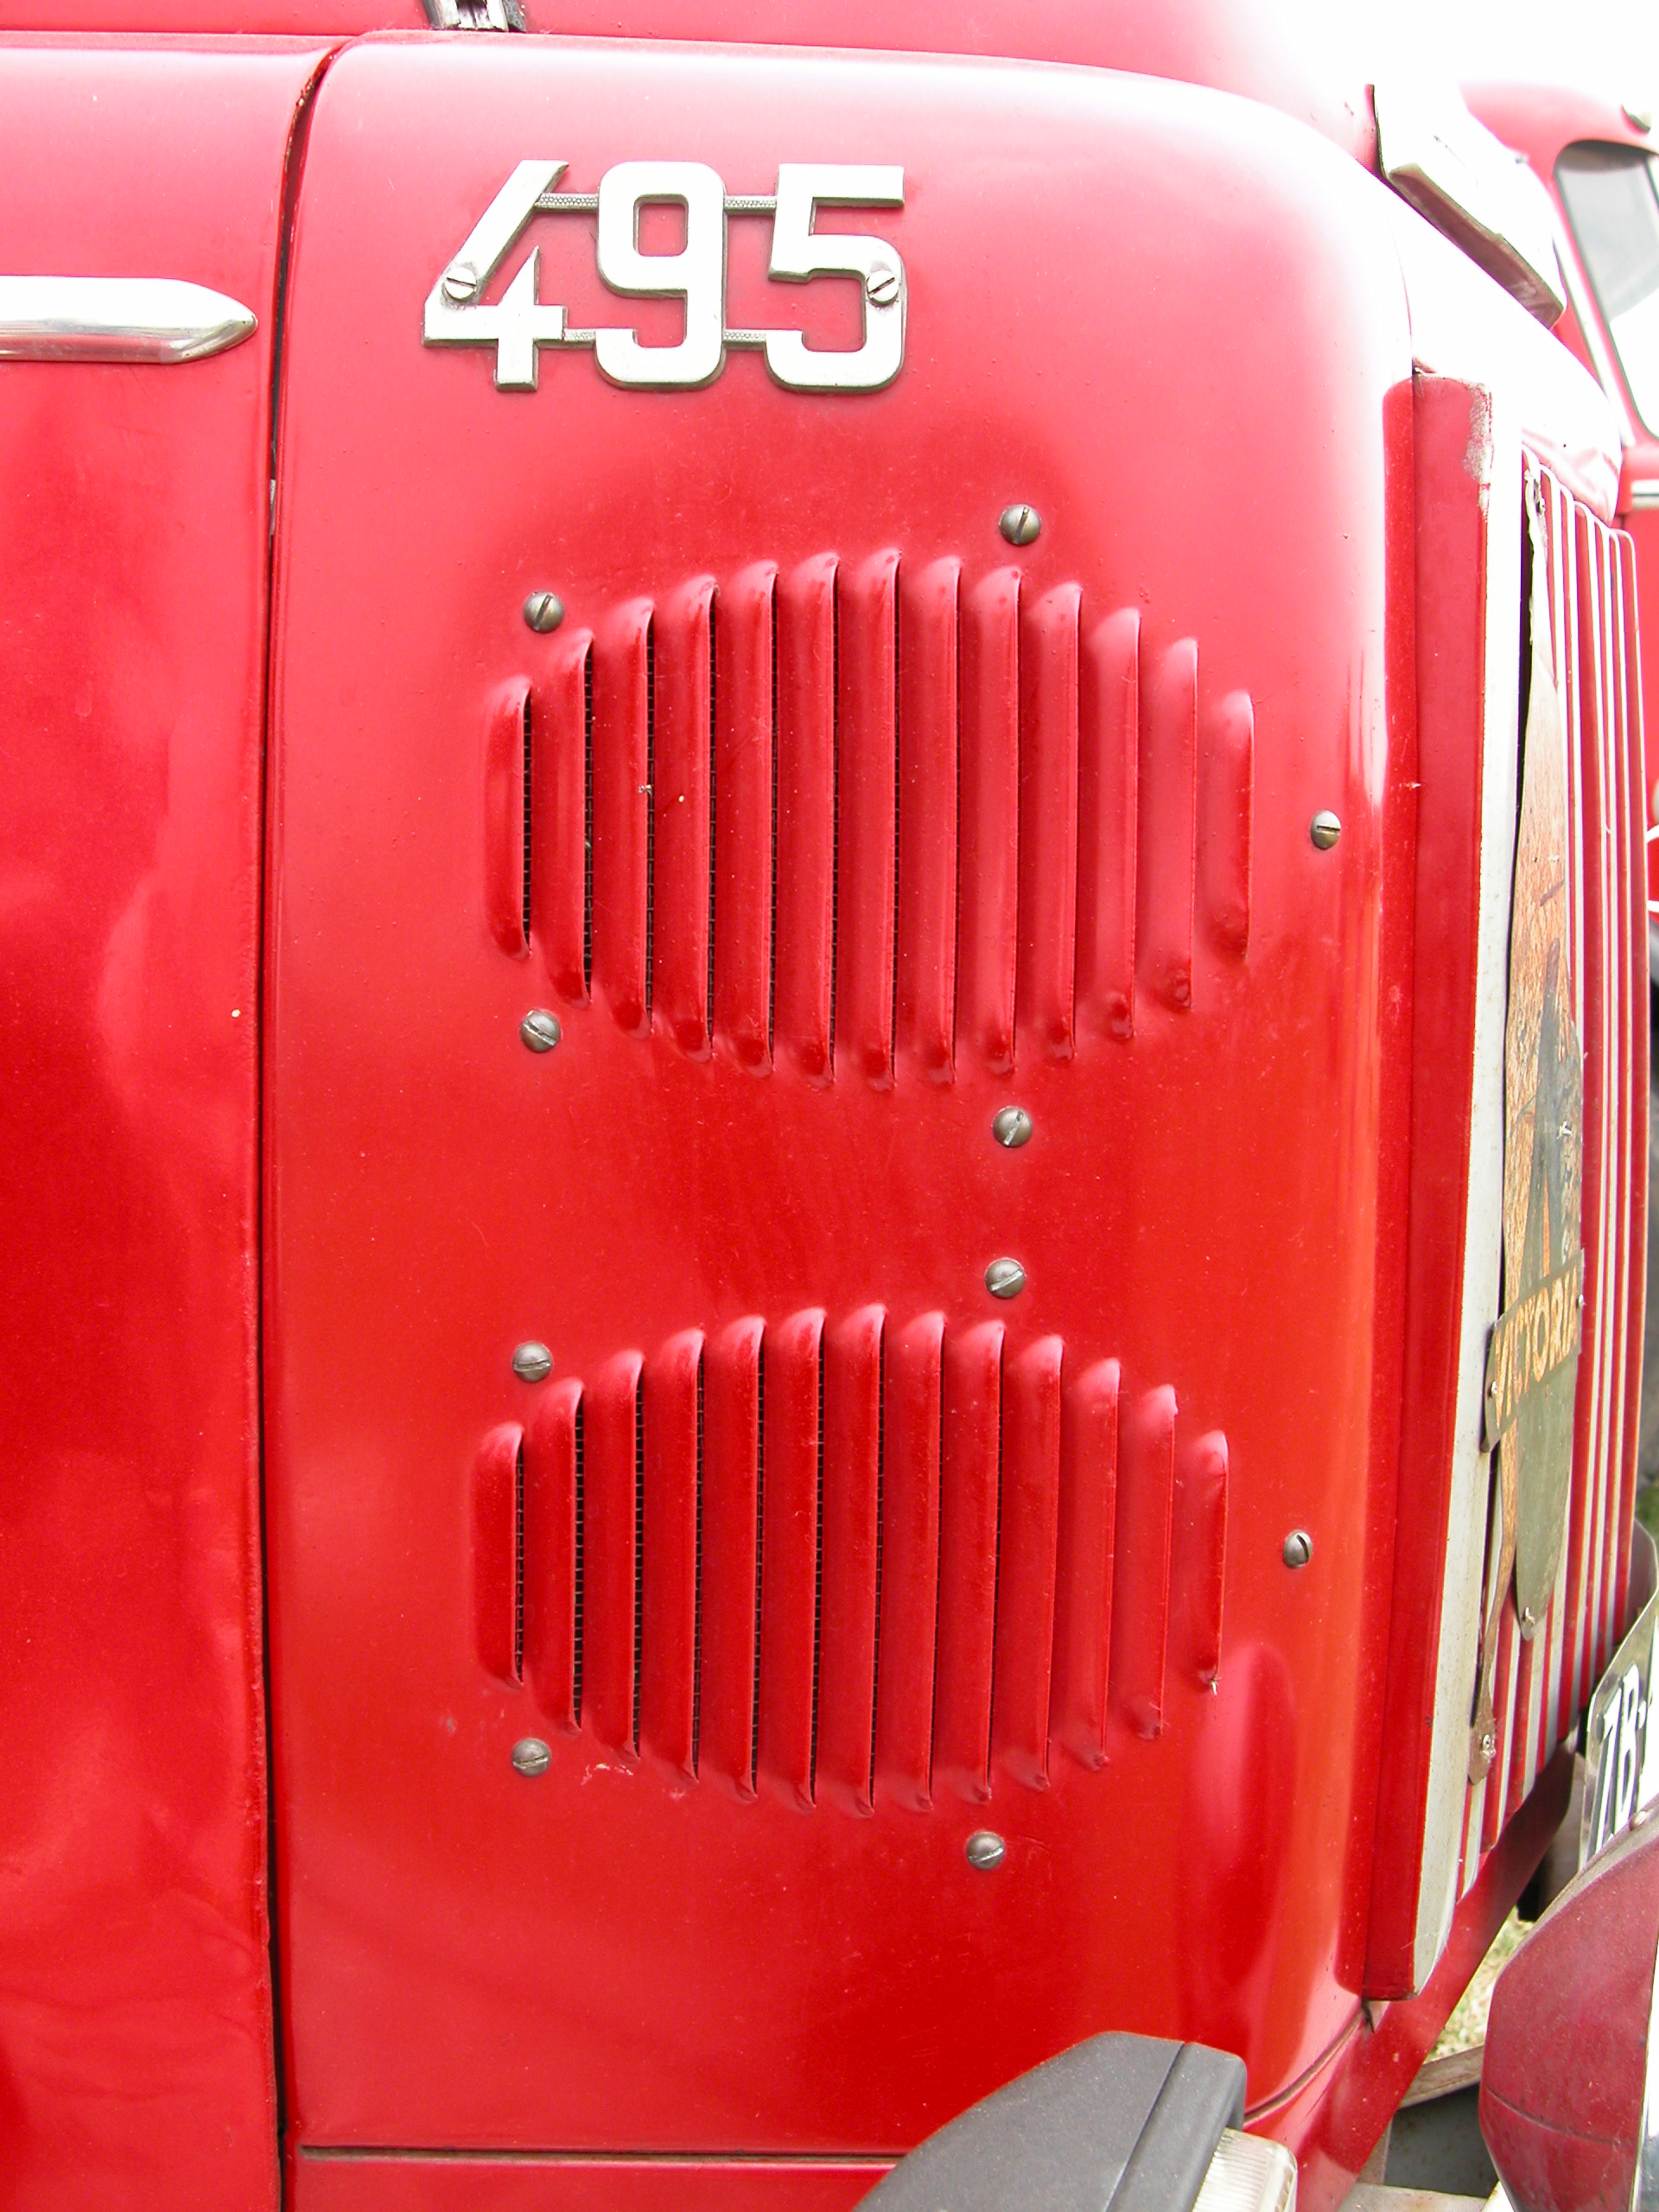 car plastic red grating shiny metal 495 front vehicle images